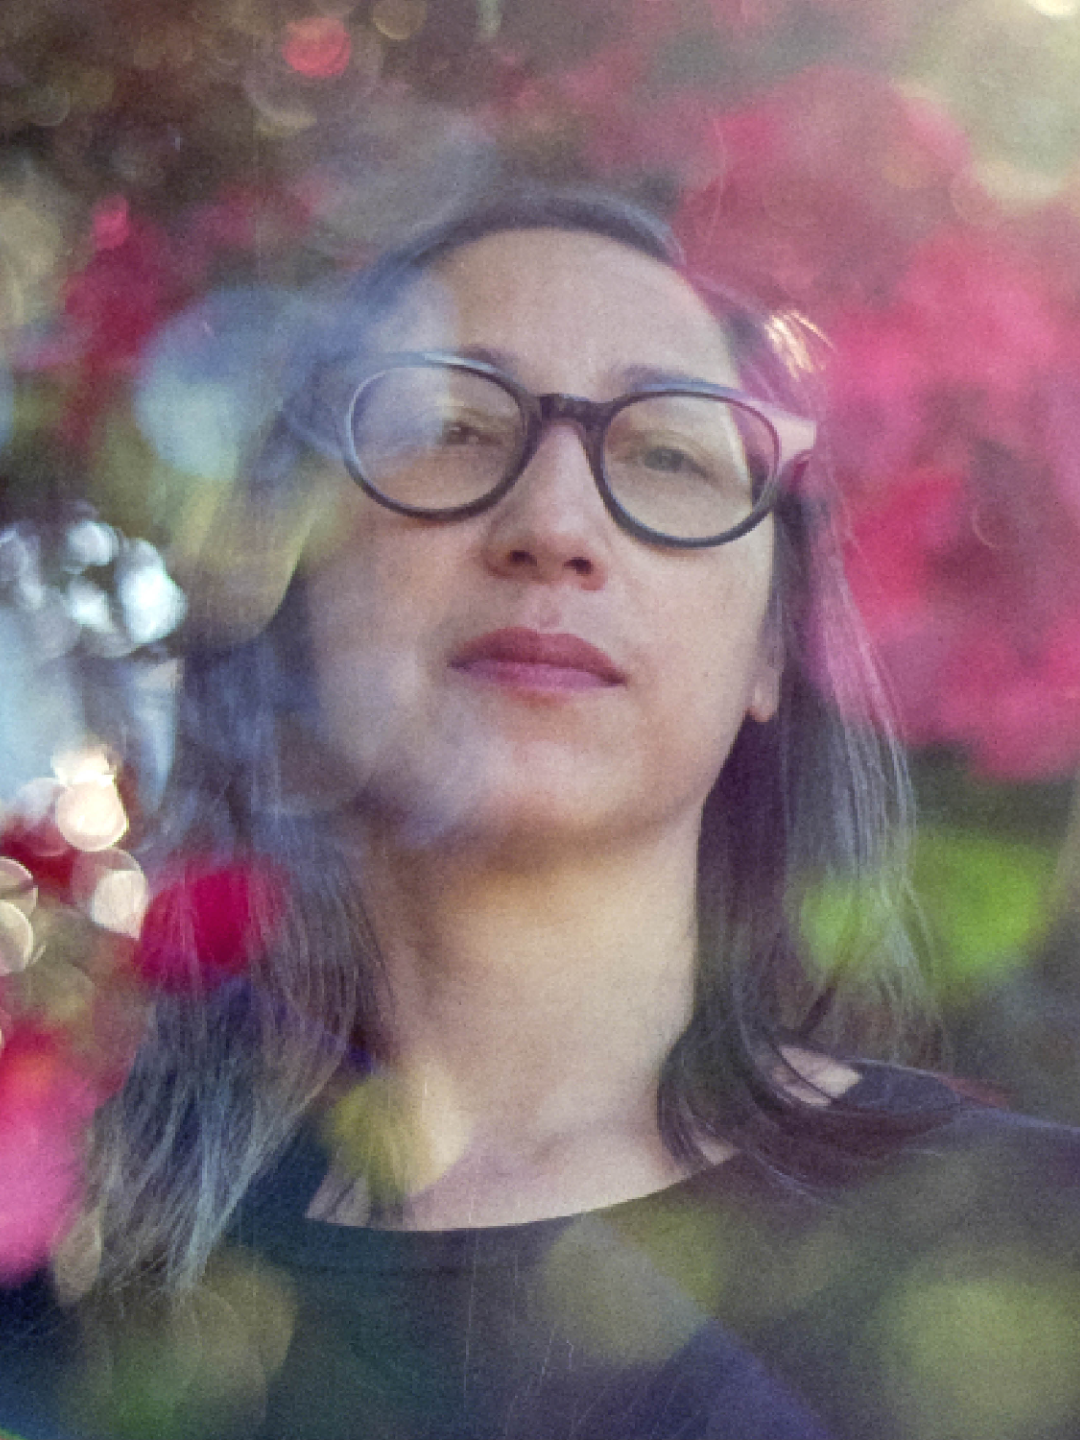 Mercedes Eng, a Chinese femme, wearing black plastic framed glasses and a black shirt is set amongst blurry and impressionistic flowering trees.